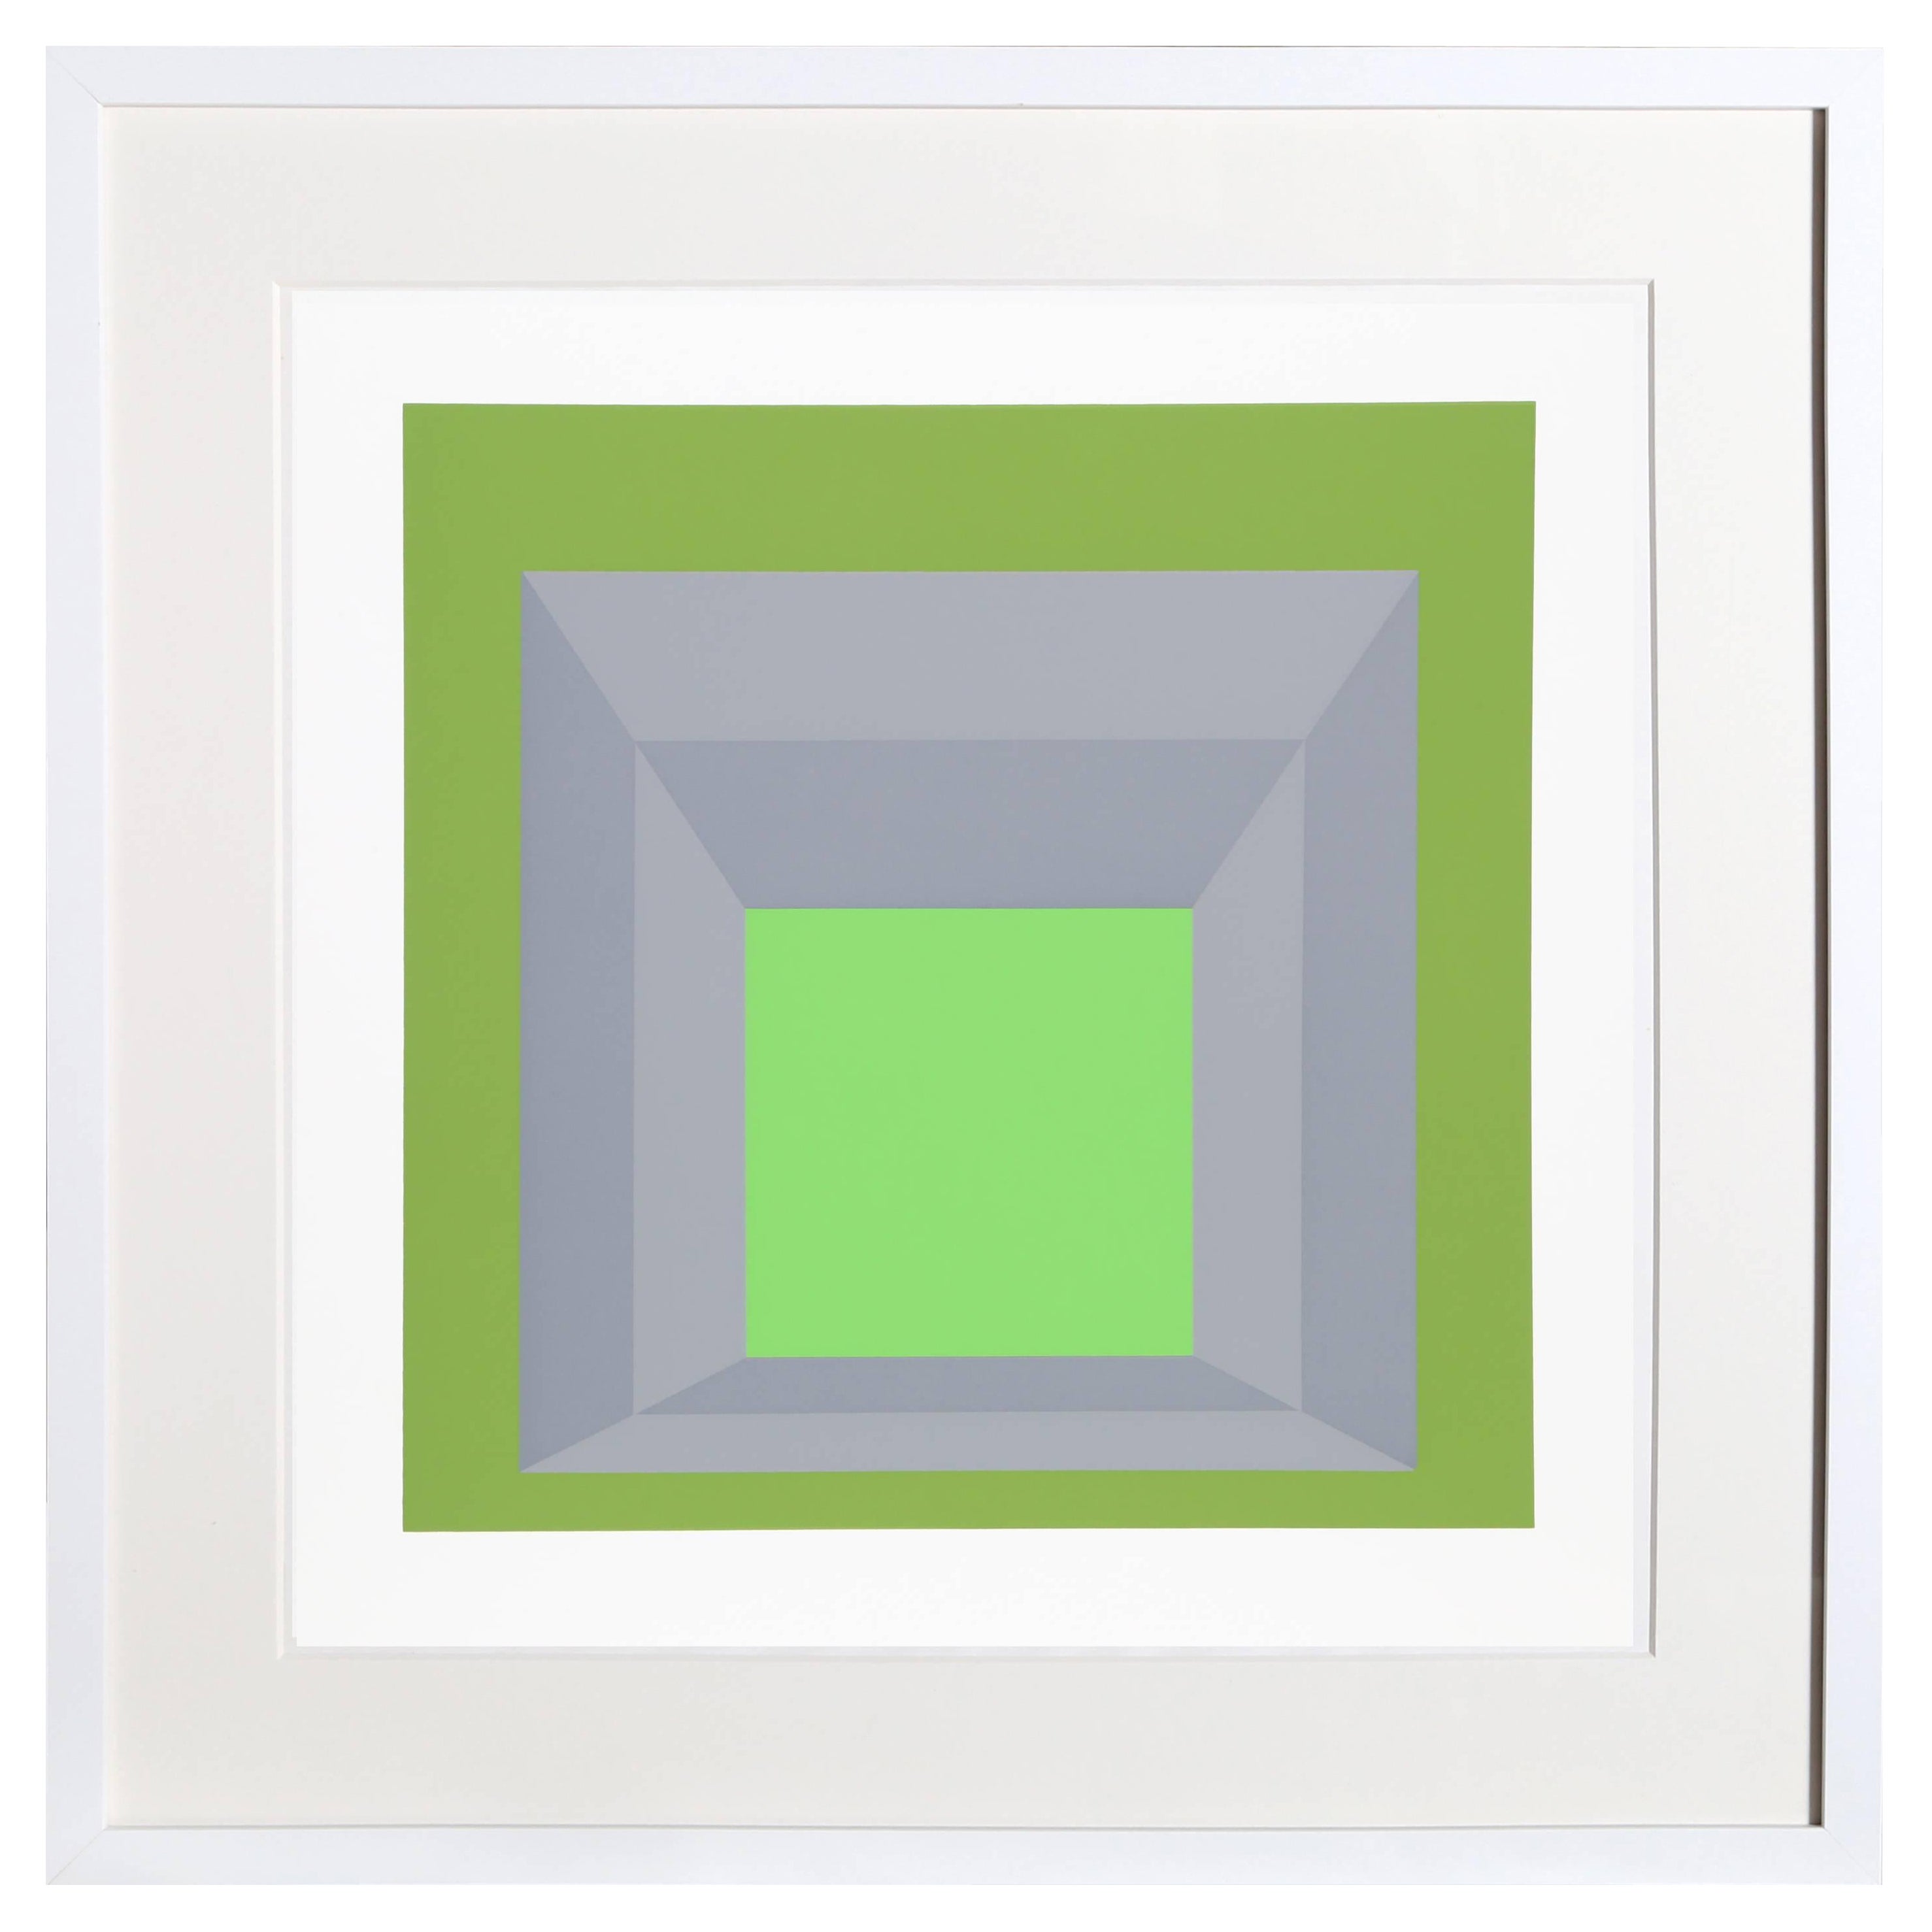 A green and gray composition that features a more dimensional rendition of Albers’ famous “Homage to the Square” series. The exterior ring of dark green flanks a window of gray before opening up to a brighter, more neon green at the center. From the